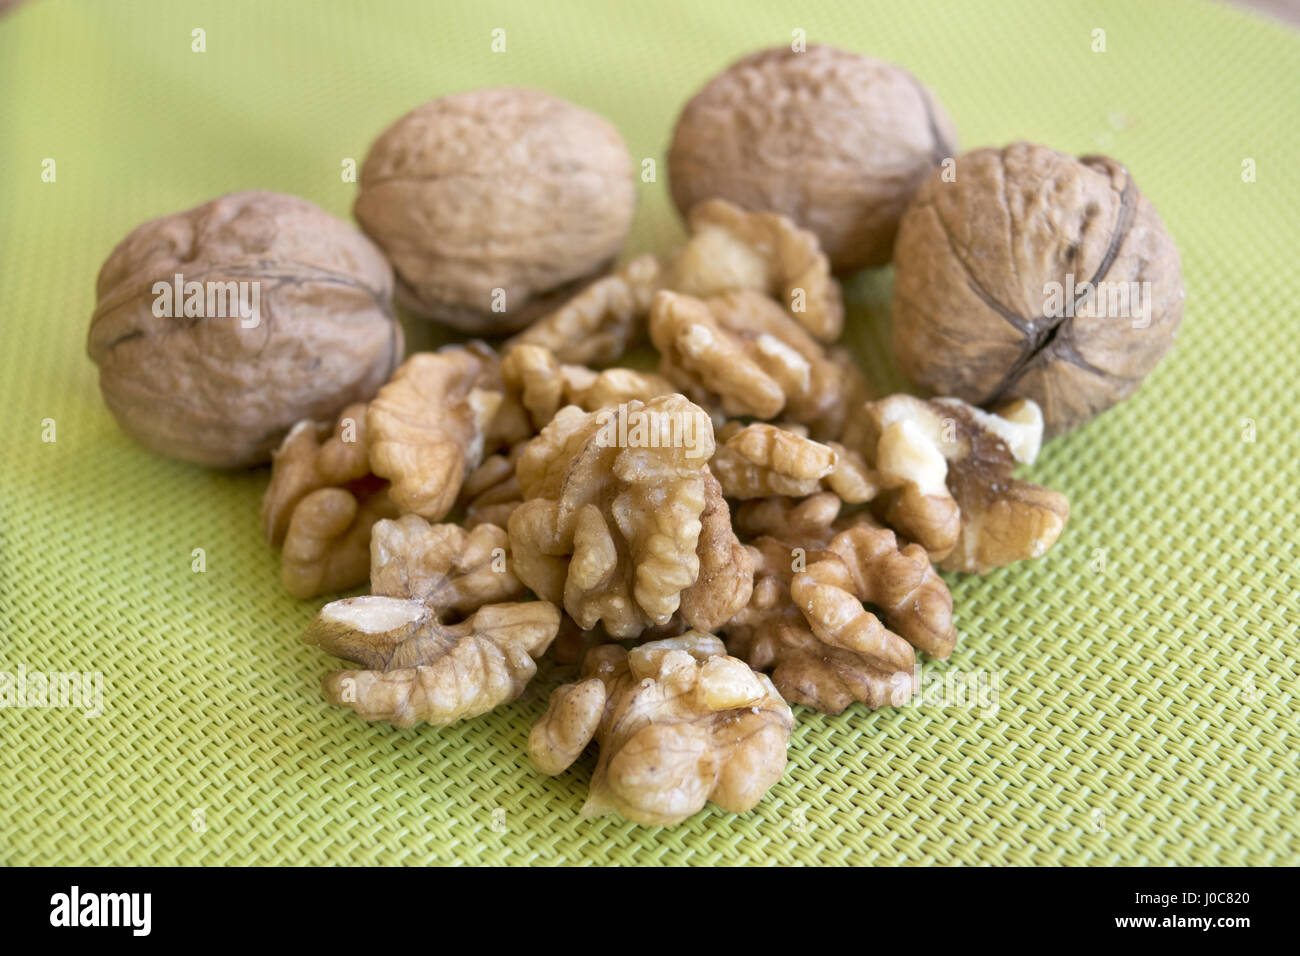 detail of kernel and whole walnuts Stock Photo